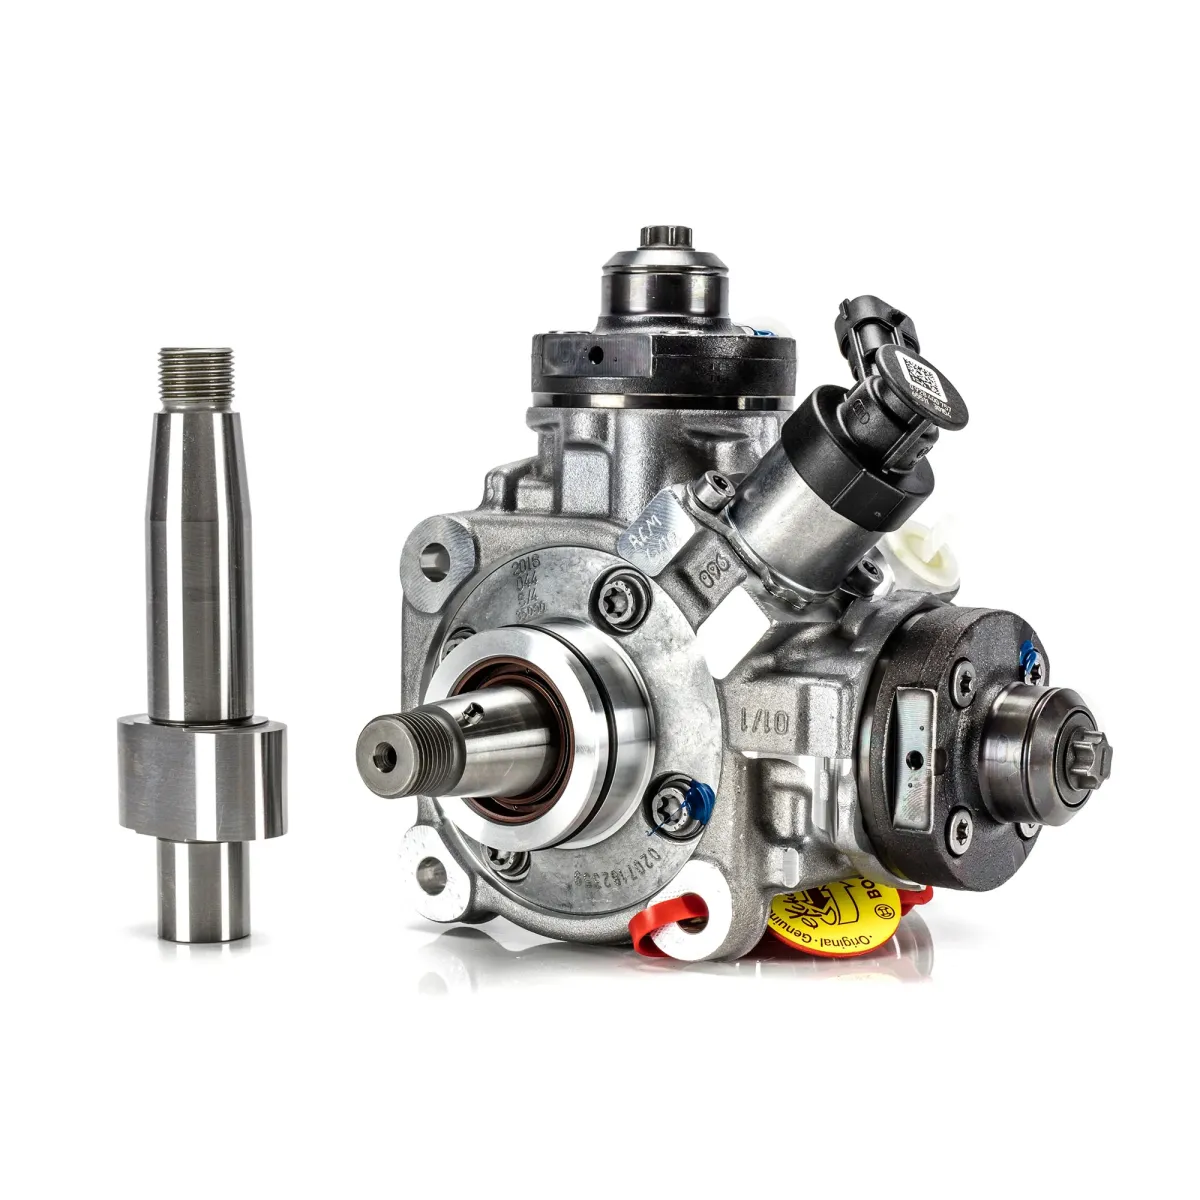 River City Diesel - RCD Performance 2011- 2019 6.7L Ford Powerstroke CPX Fuel Injection Pump Stock Output